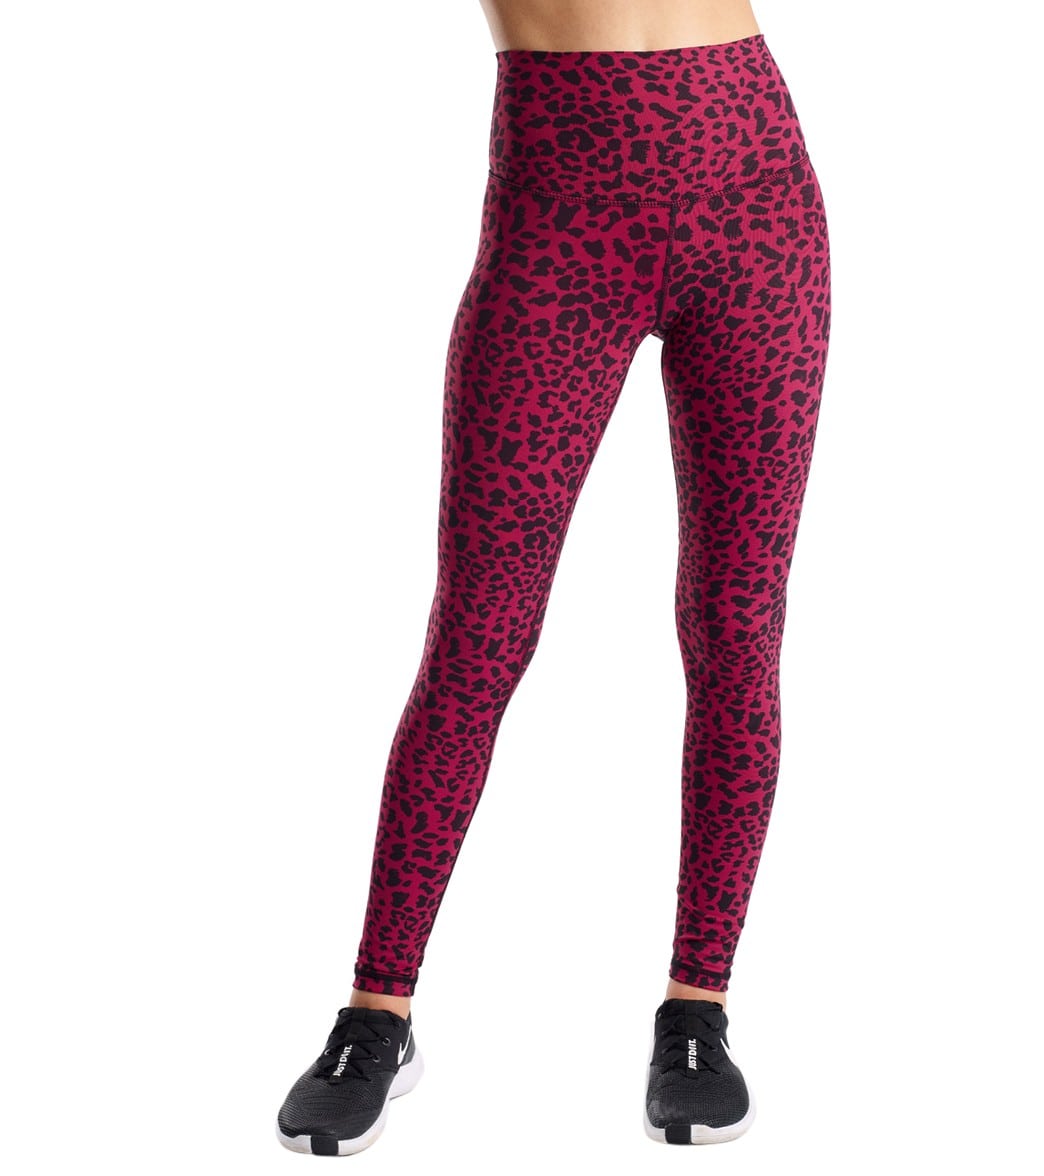 Women's Clearance Pureactive Pocket Legging Made With, 52% OFF